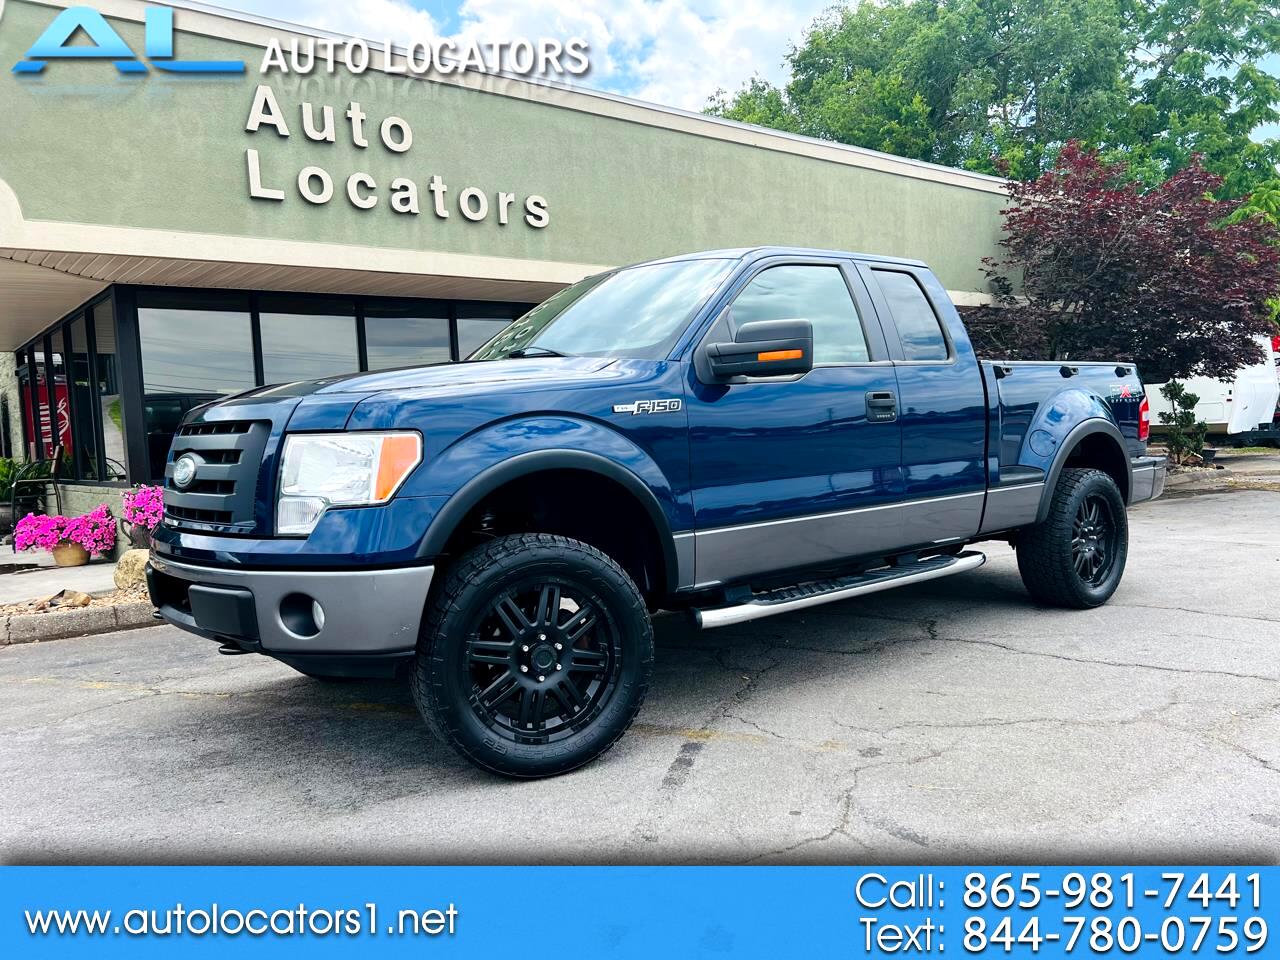 Ford F-150 4WD Supercab Flareside 145" FX4 2009